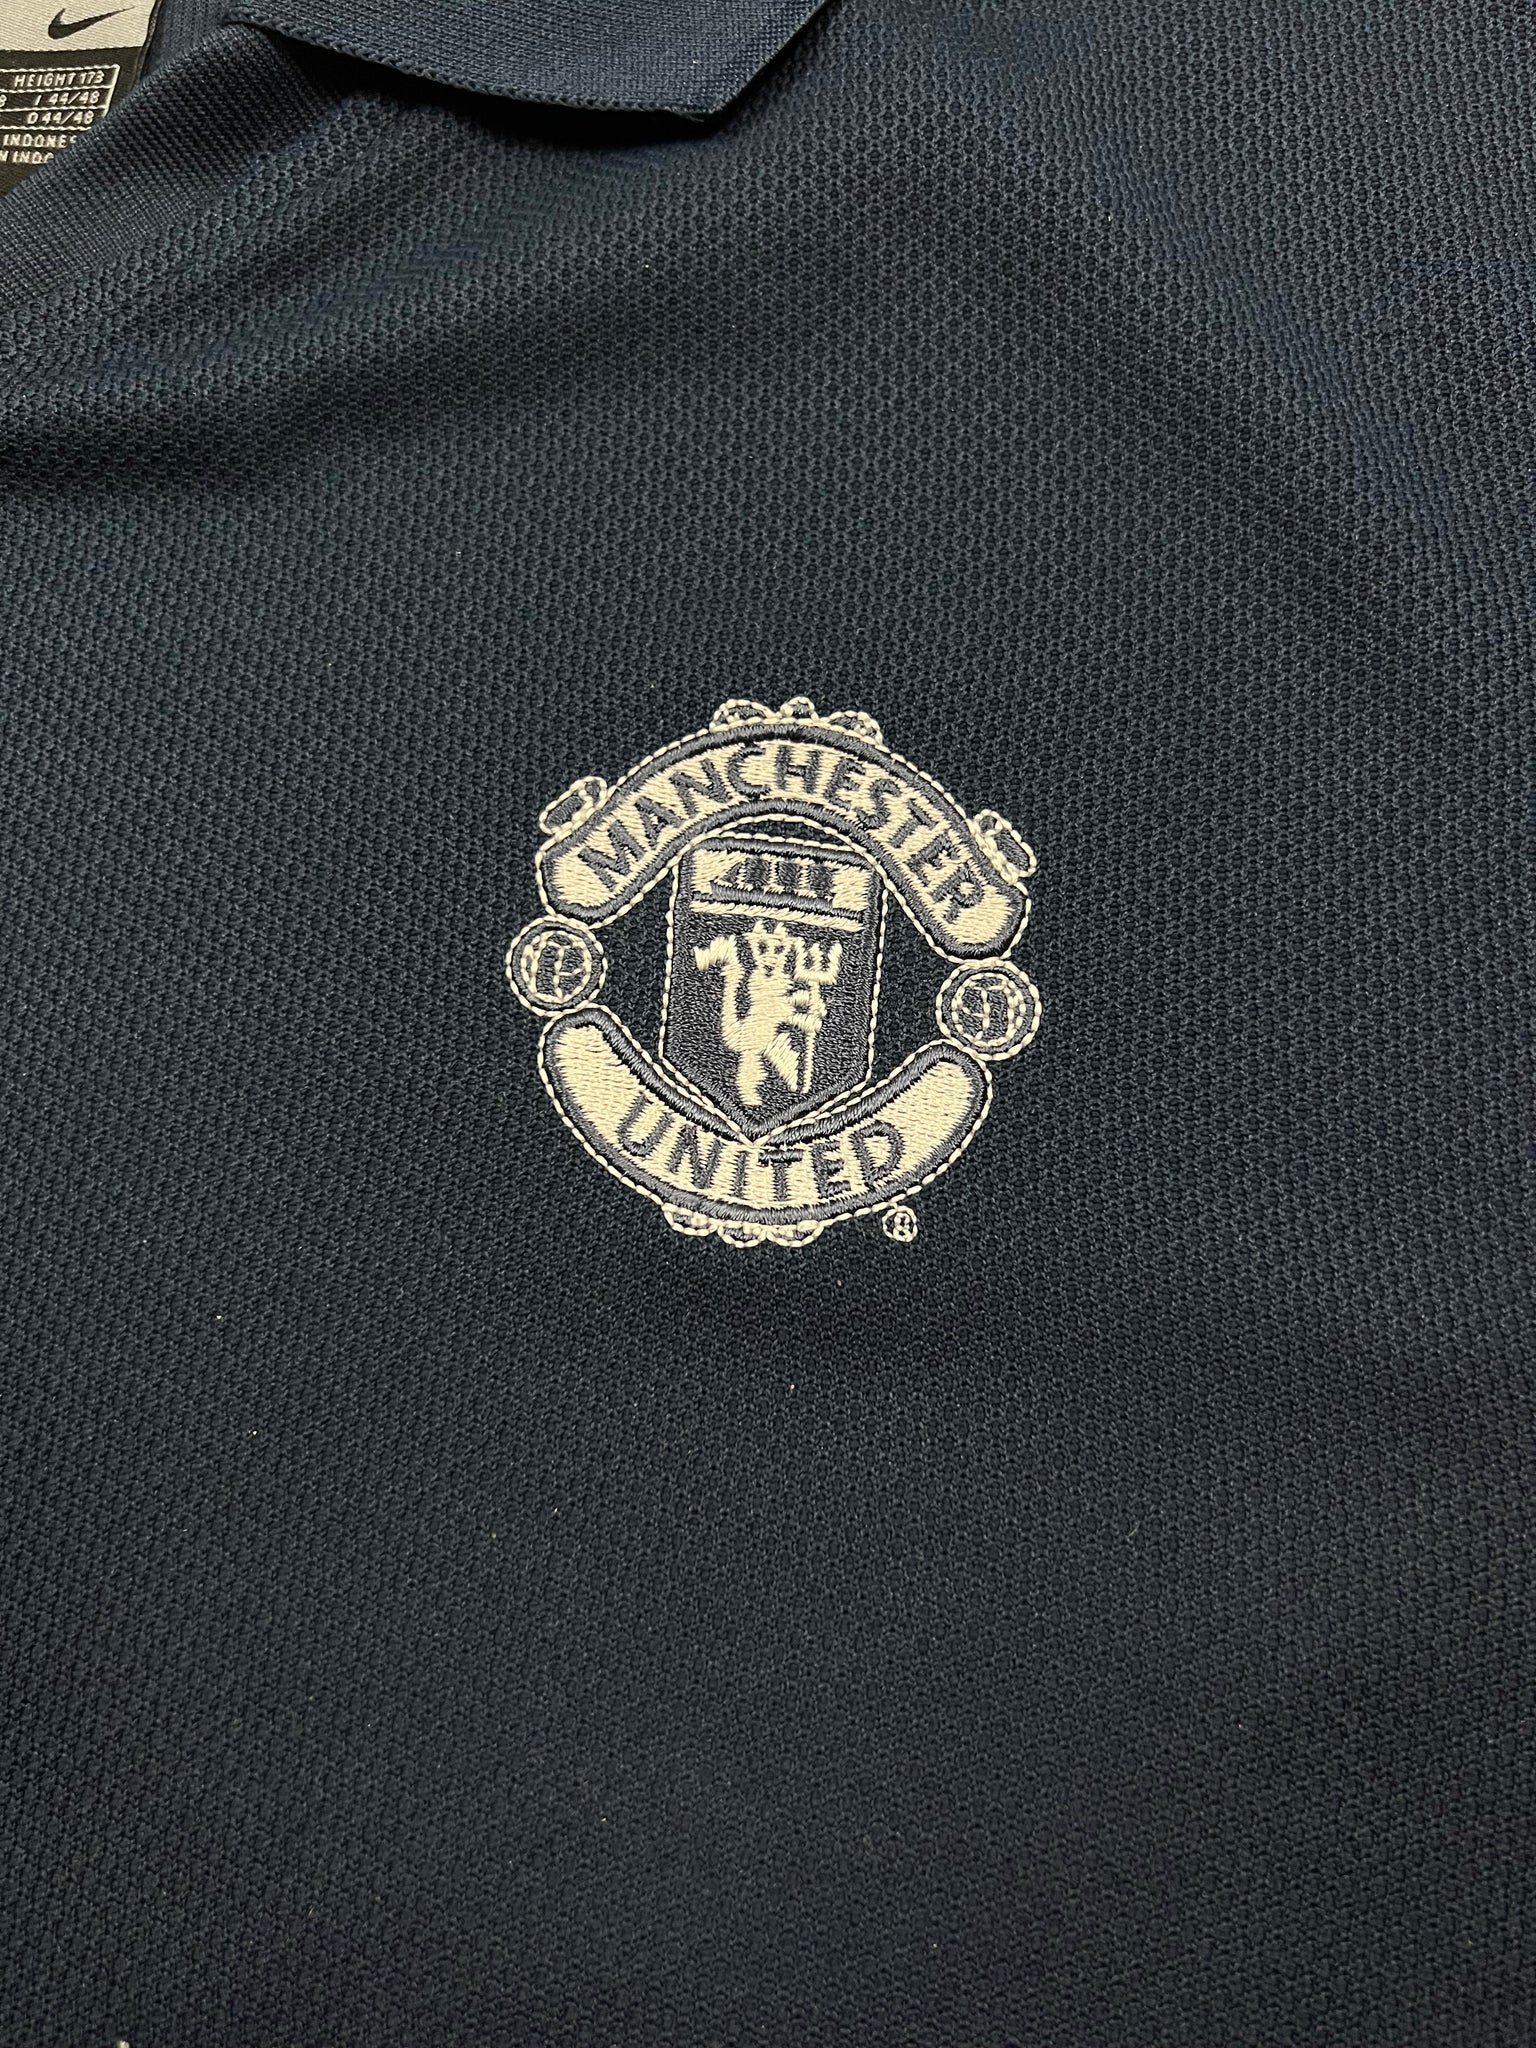 Nike Manchester United Polo (S)